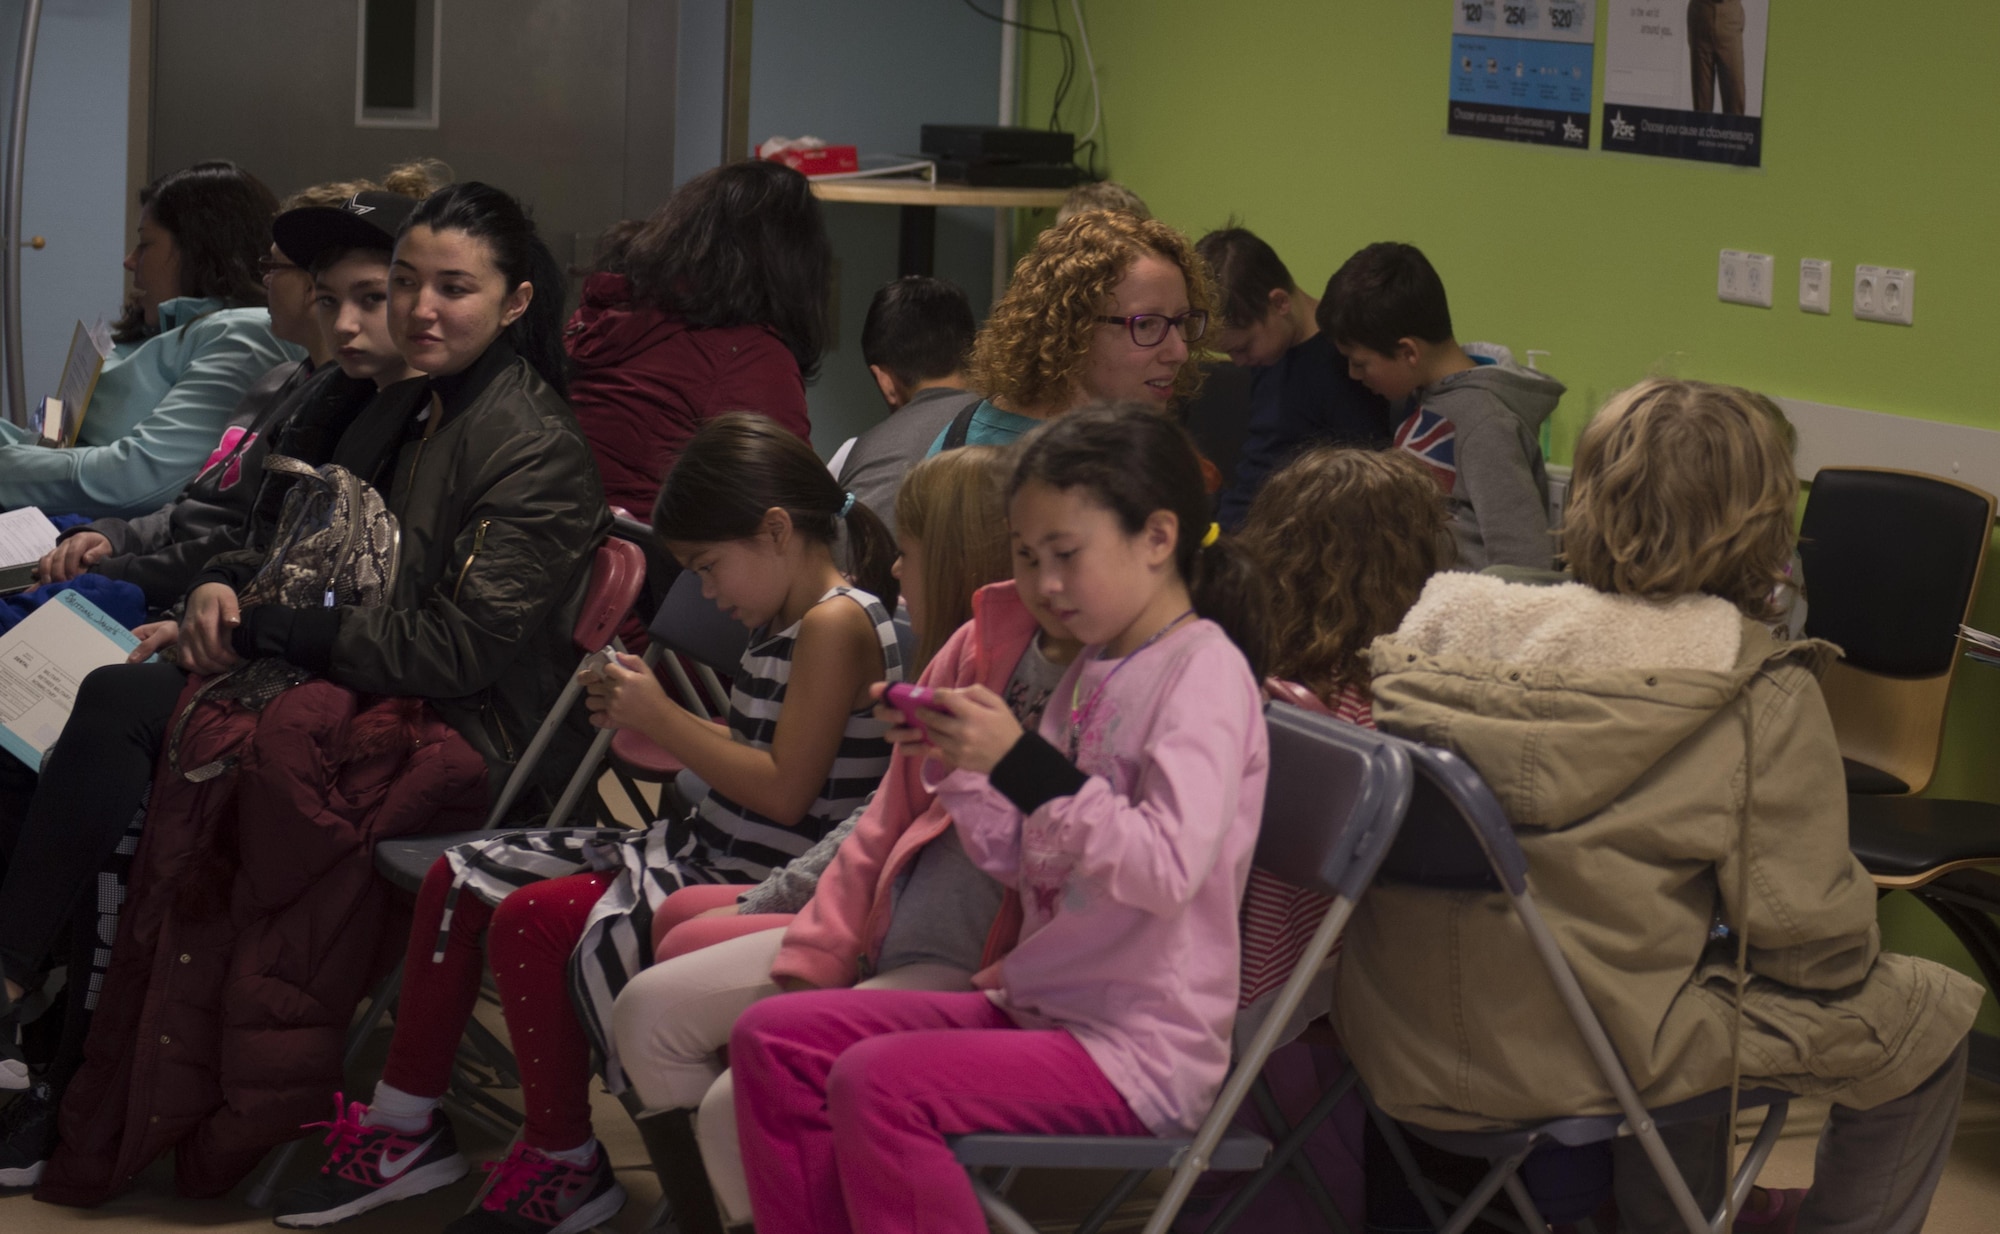 Family members of the 52nd Fighter Wing wait in the 52nd Dental Squadron’s lobby during the semi-annual walk-in kiddie clinic at Spangdahlem Air Base, Germany, Nov. 4, 2016. The clinic offers routine cleanings and checkups for children up to the age of 13. (U.S. Air Force photo by Senior Airman Dawn M. Weber)